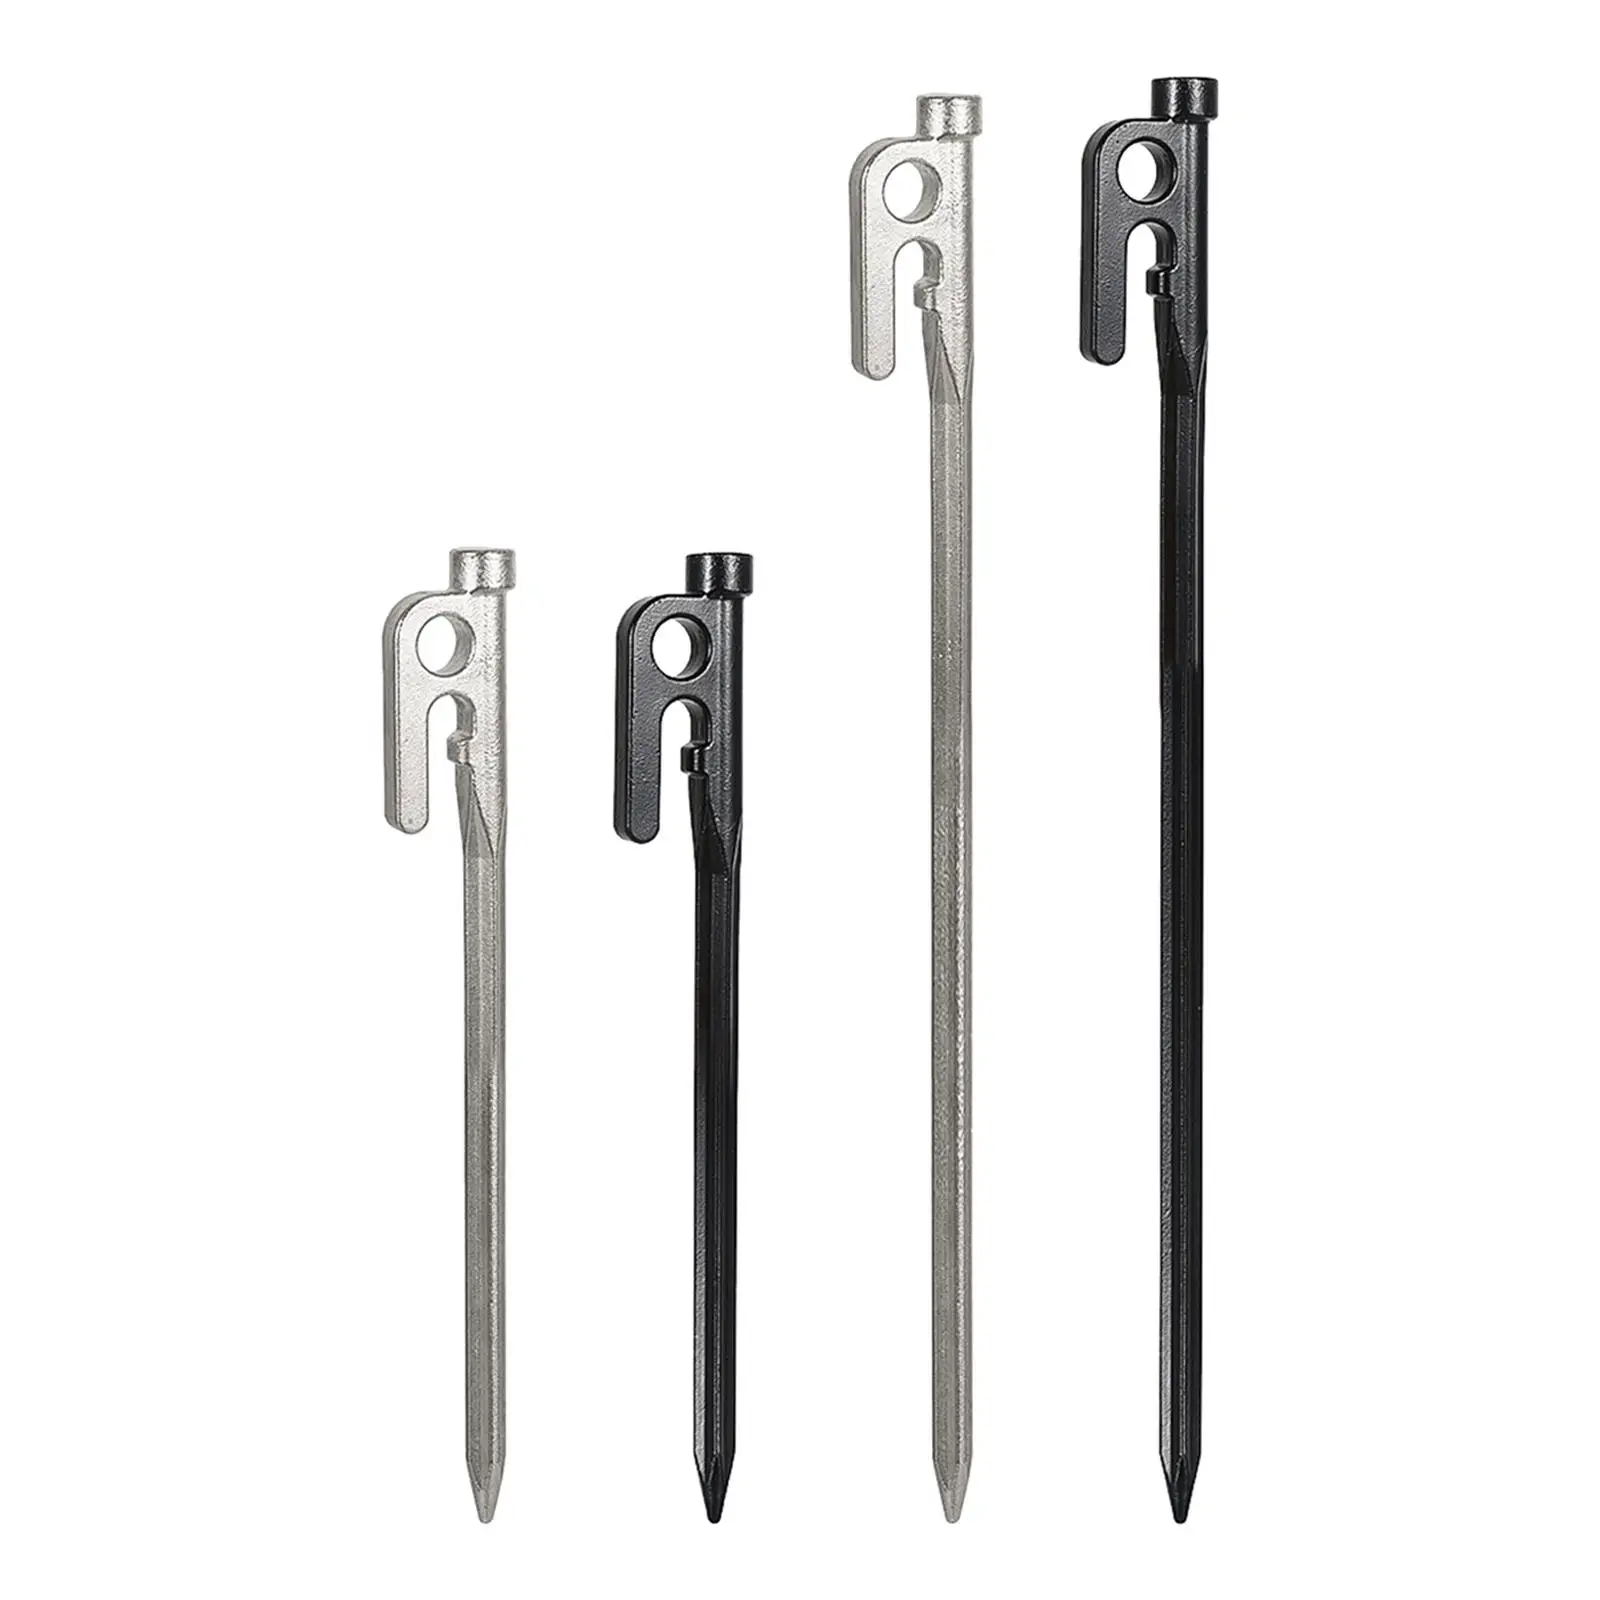 4pcs Outdoor High Strength Stainless Steel tent nail spike canopy Tent peg Camping Tent nail stakes